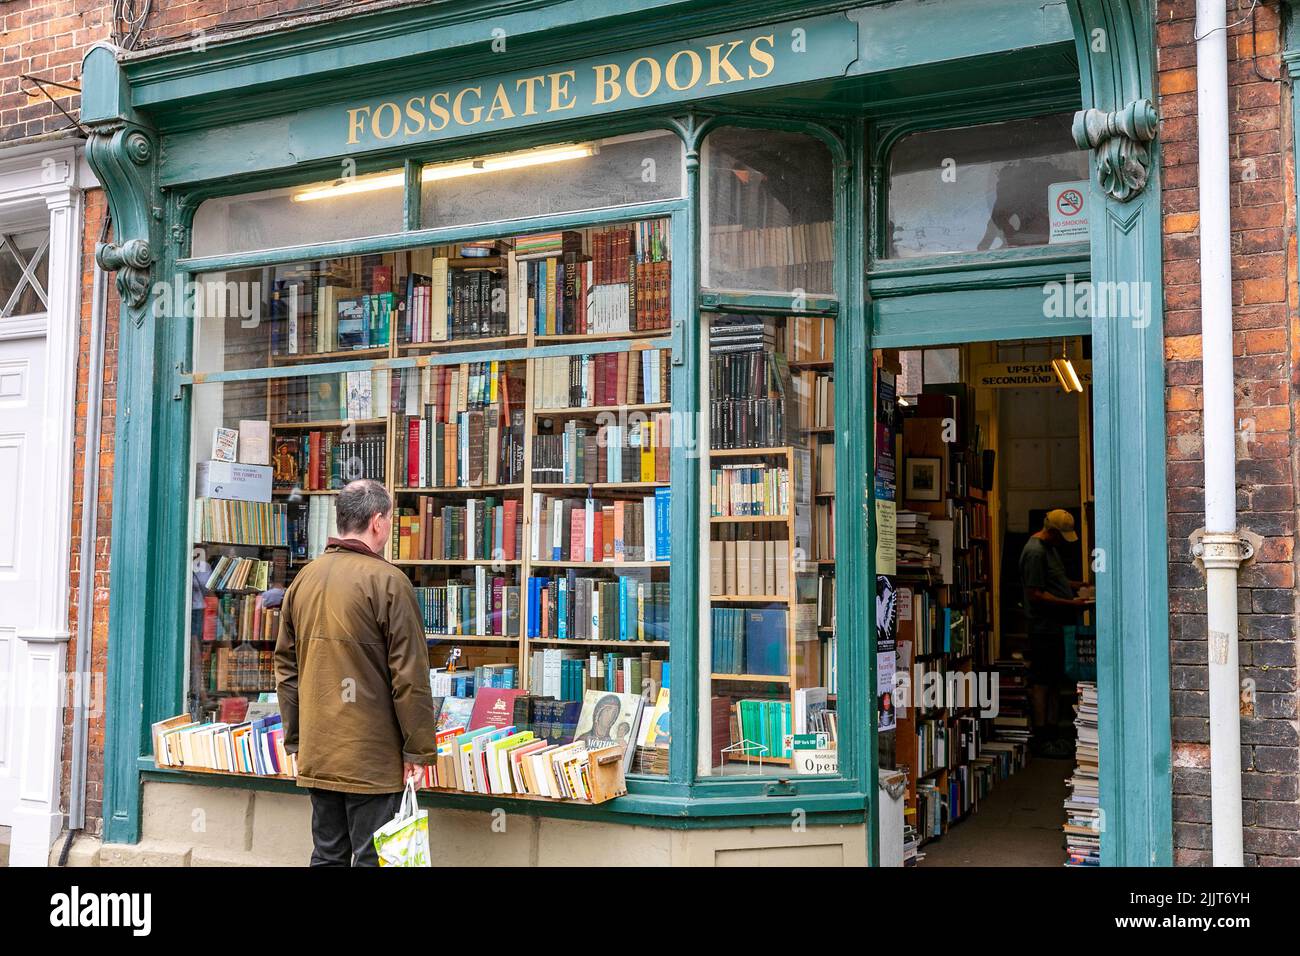 Fossgate books in York city centre seller of rare and secondhand books,York,Yorkshire, with man viewing books in the window,England,UK Stock Photo